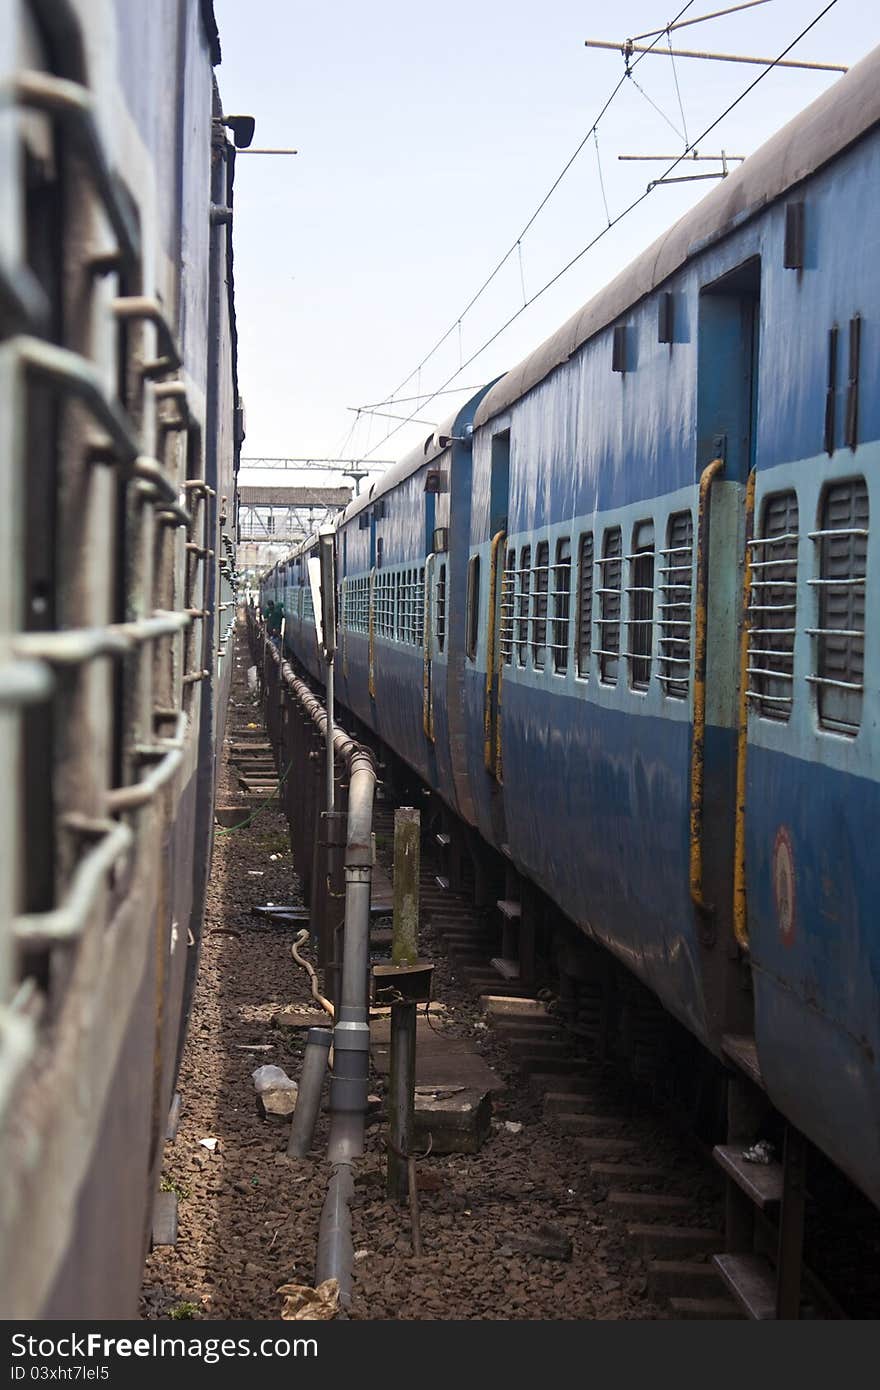 Two long trains in India